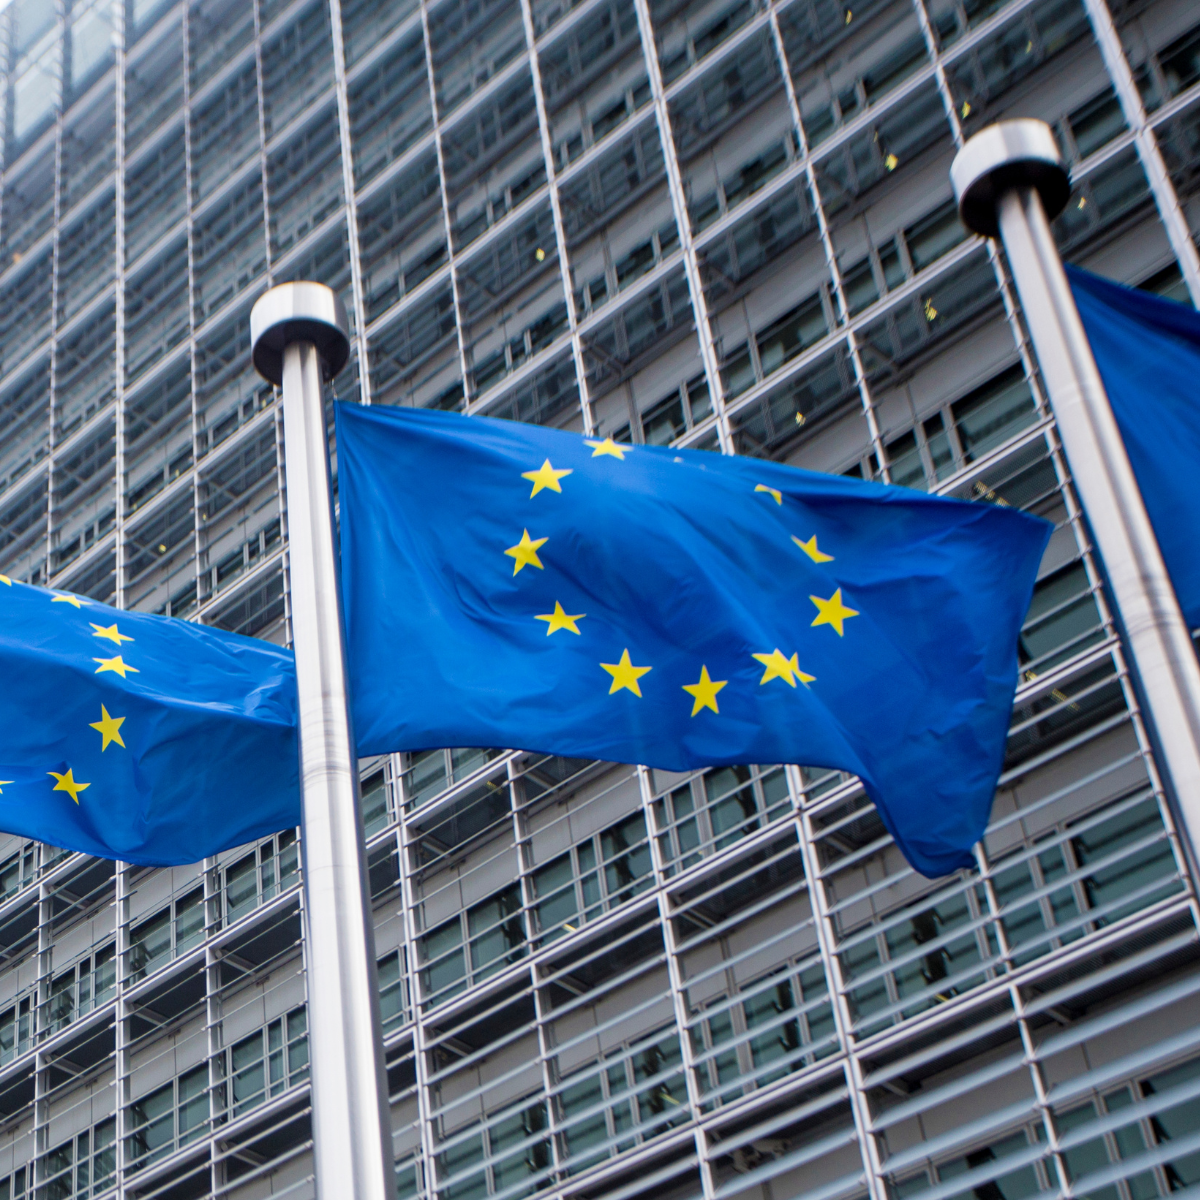 DAC7: Is Your Online Platform Ready for the EU’s New Tax Rule?